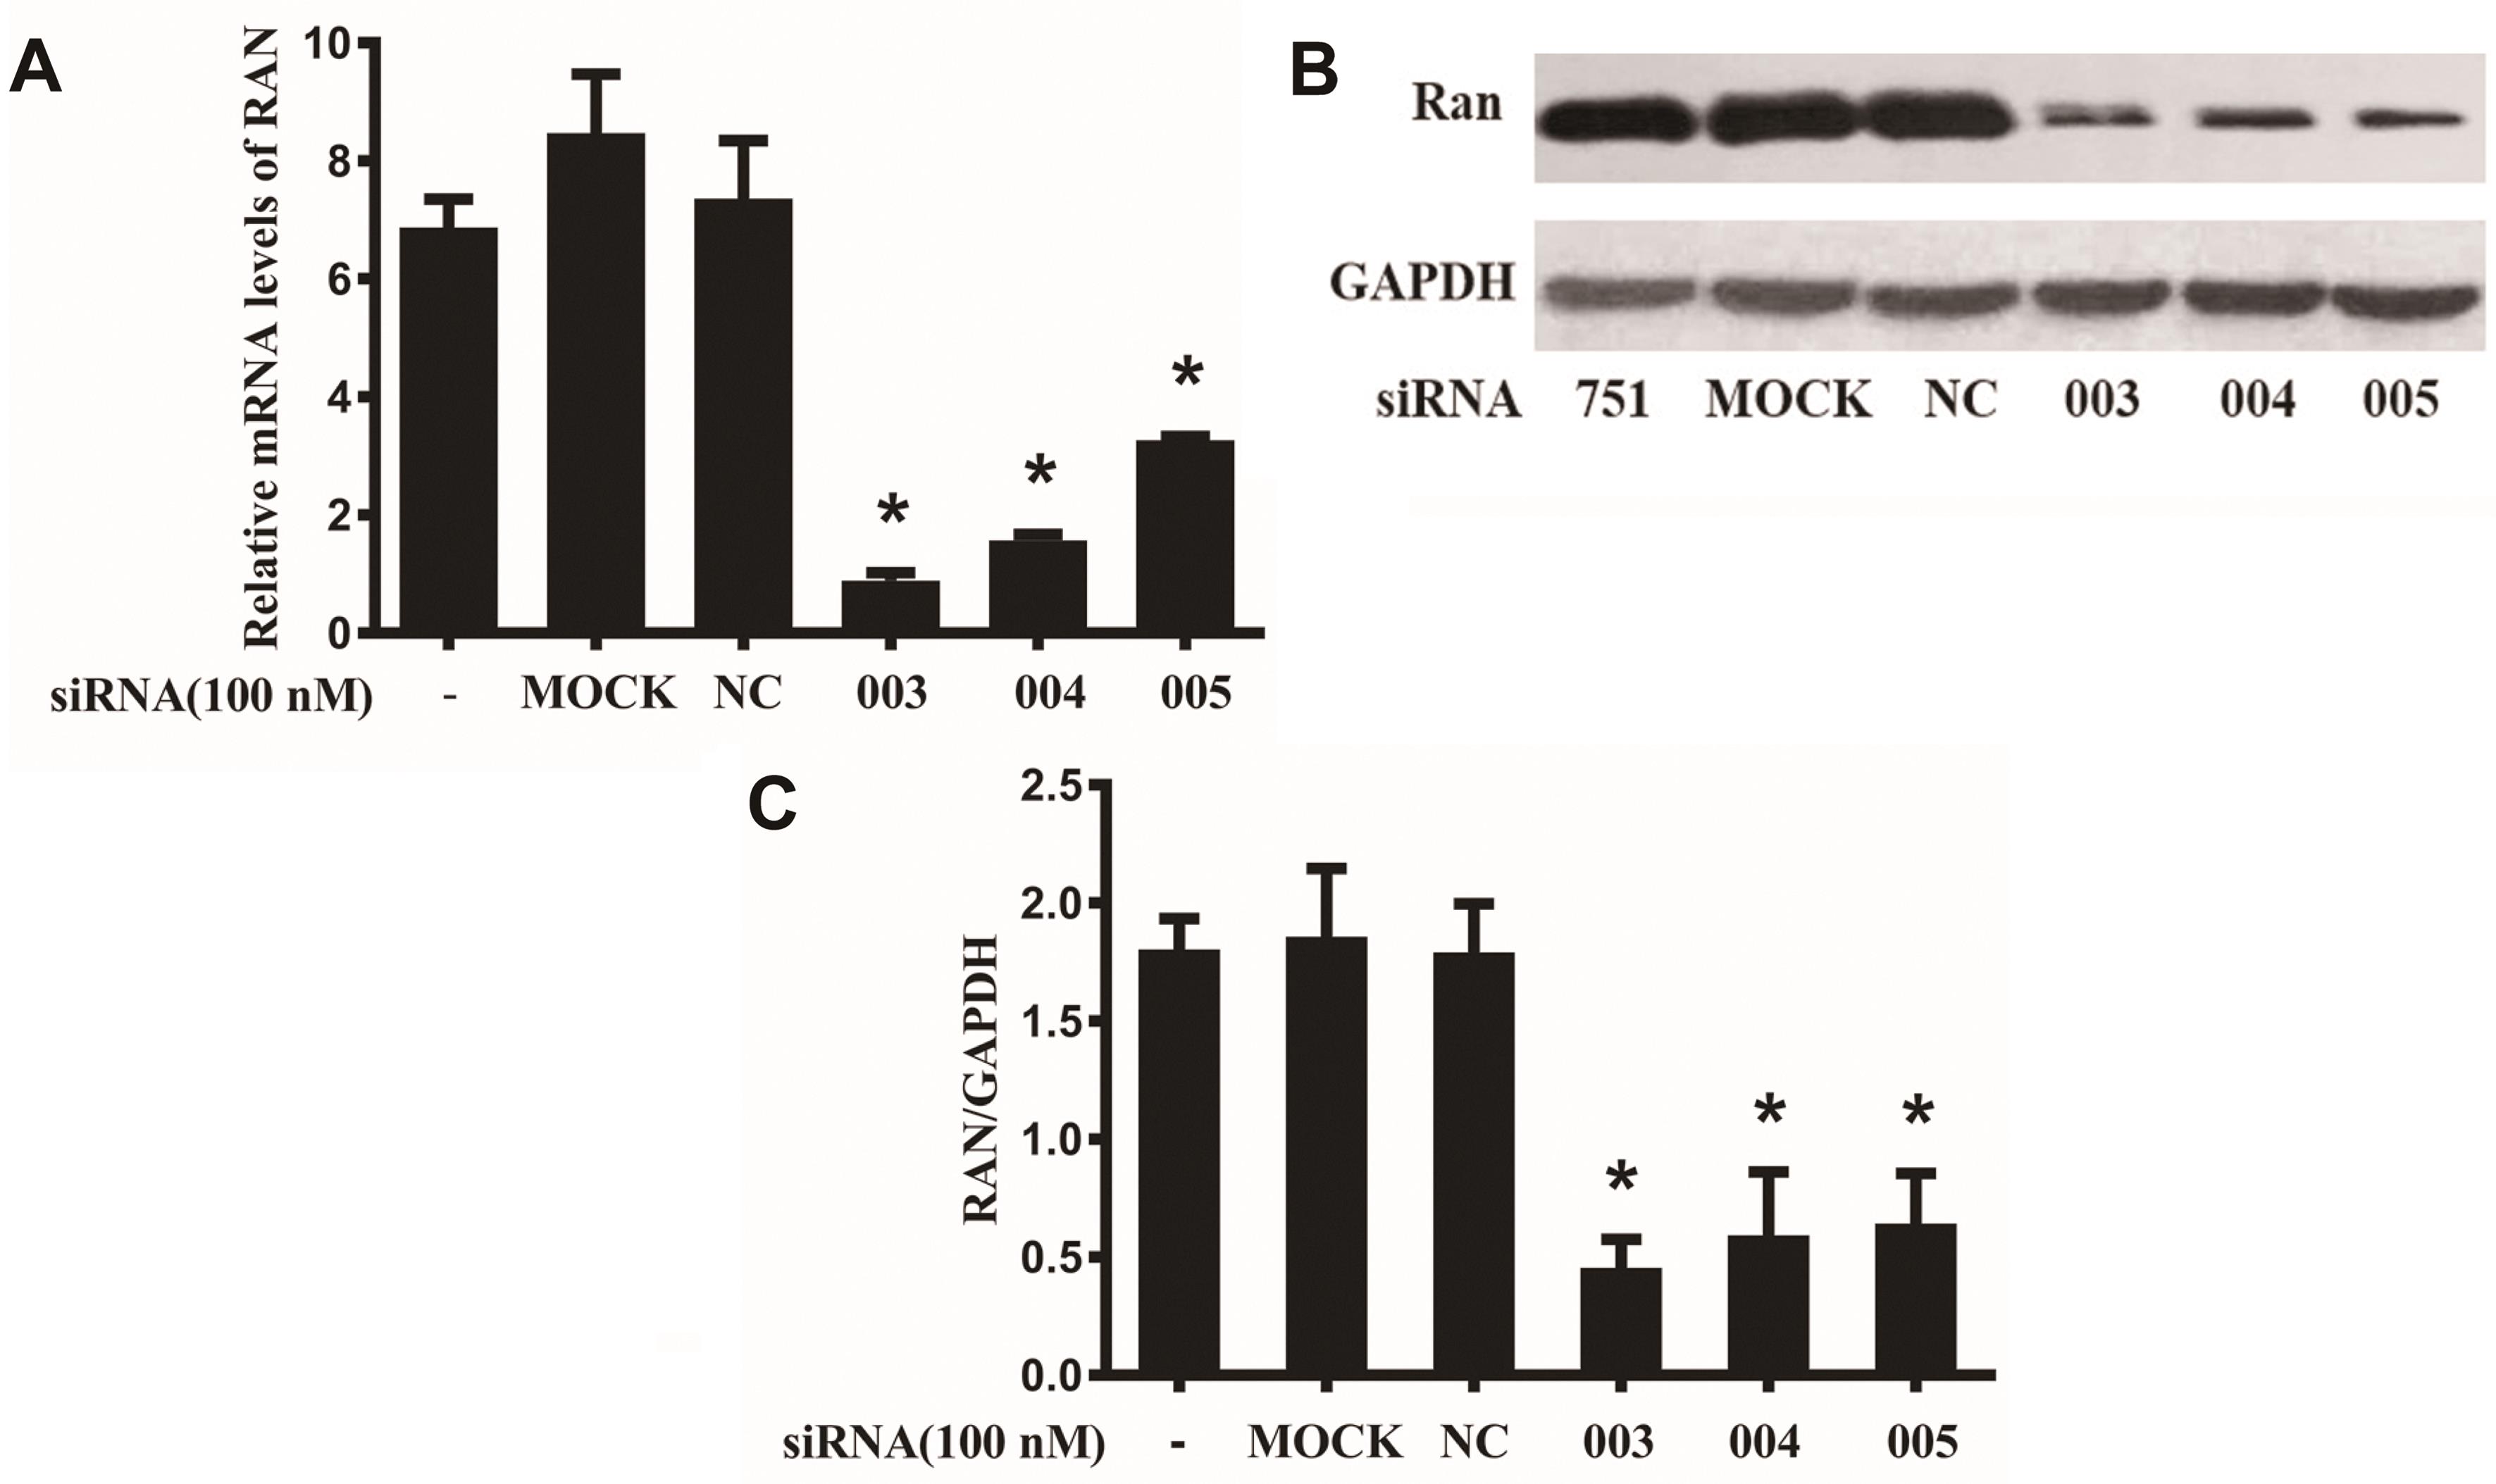 Silencing effects of siRNAs on the mRNA and protein expression levels of RAN. Huh7.5.1 cells were treated with siRNAs specific to RAN (003, 004 and 005); an irrelevant siRNA (NC) was used as a control in each experiment.